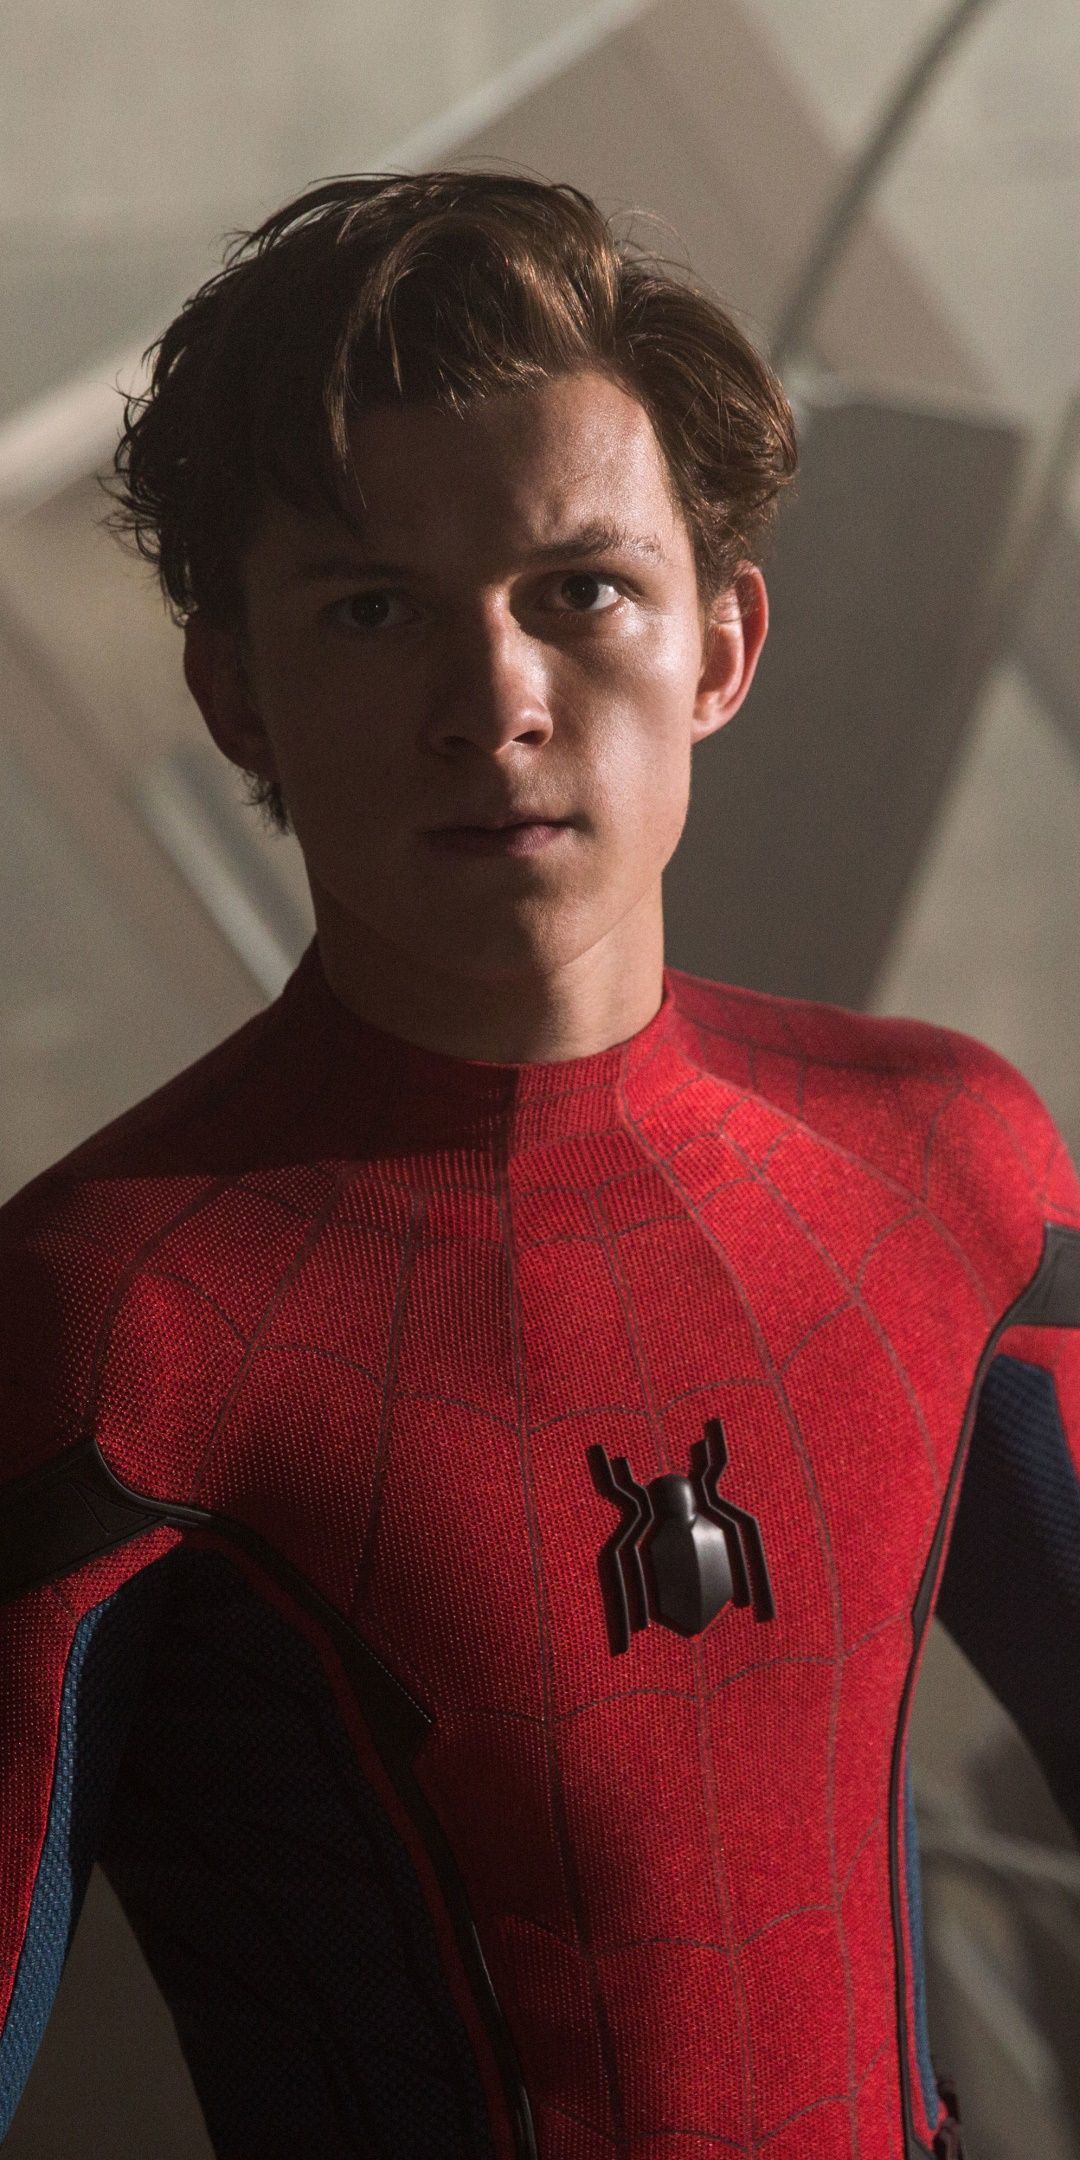 Wallpaper / Movie Spider Man: Homecoming Phone Wallpaper, Spider Man, Peter Parker, Tom Holland, 1080x2160 Free Download